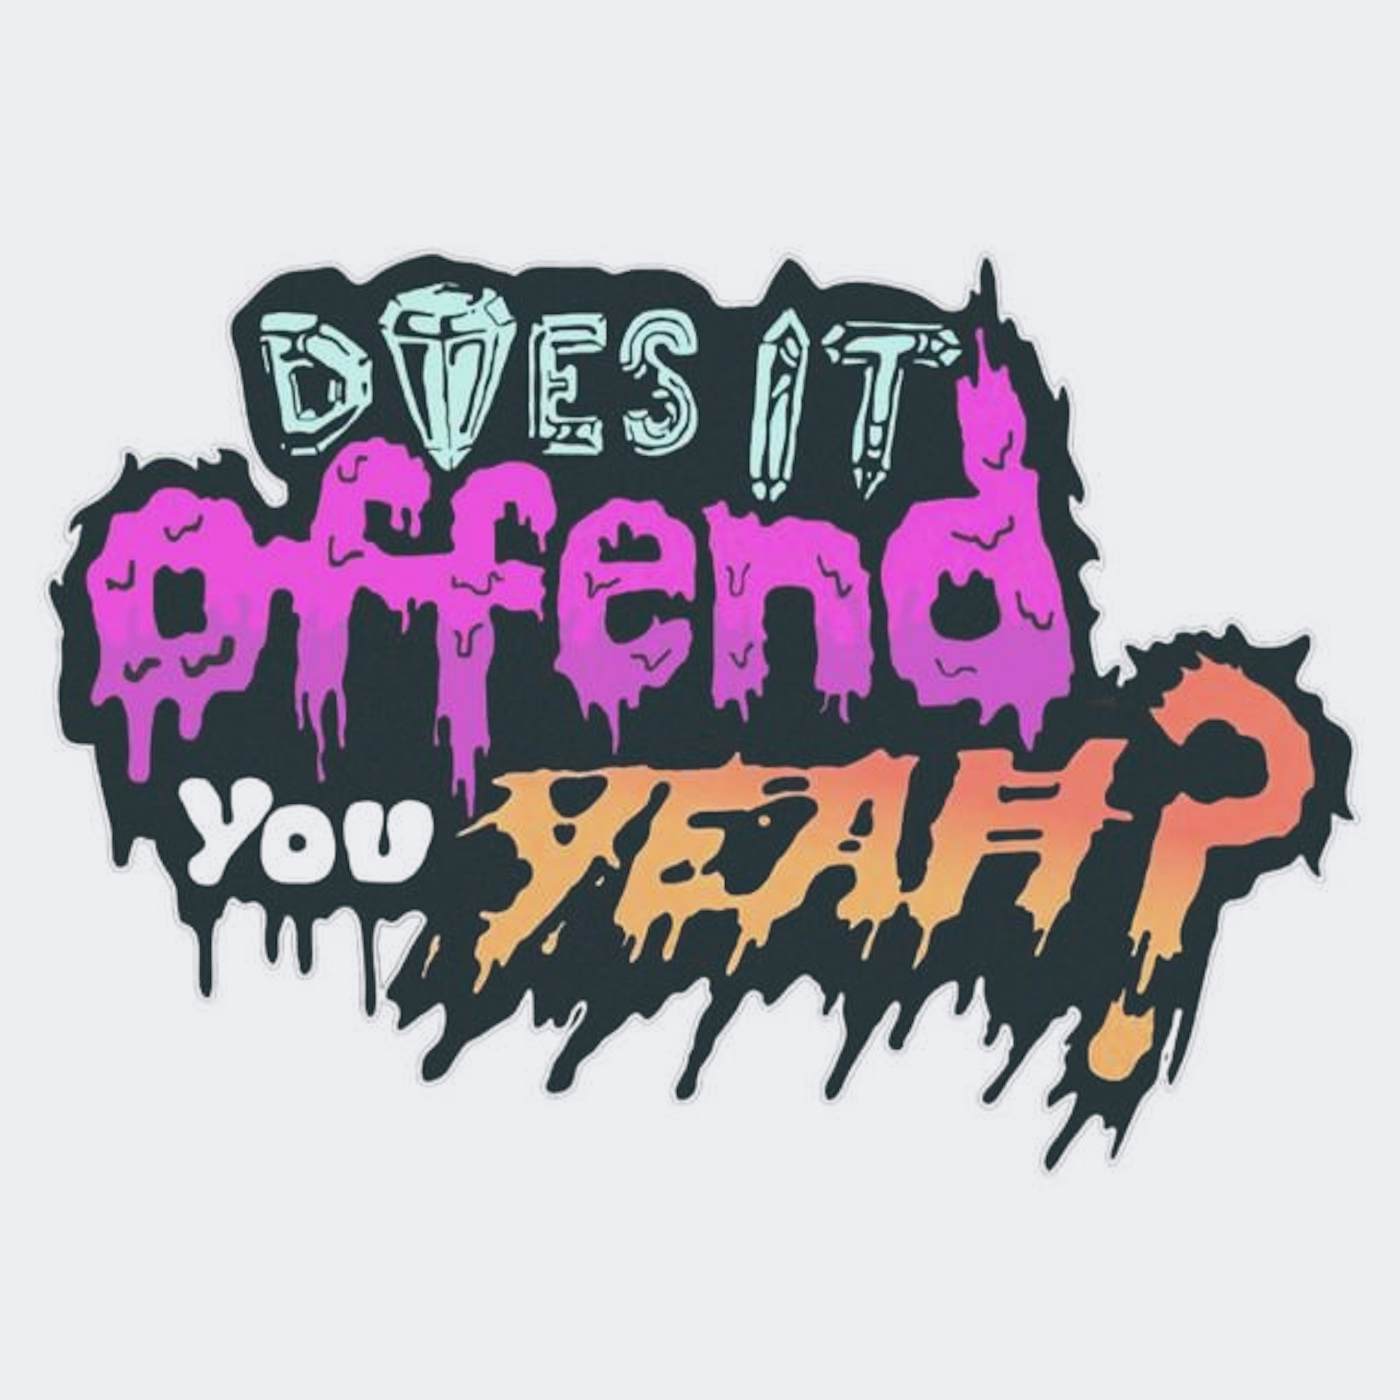 Does It Offend You, Yeah?